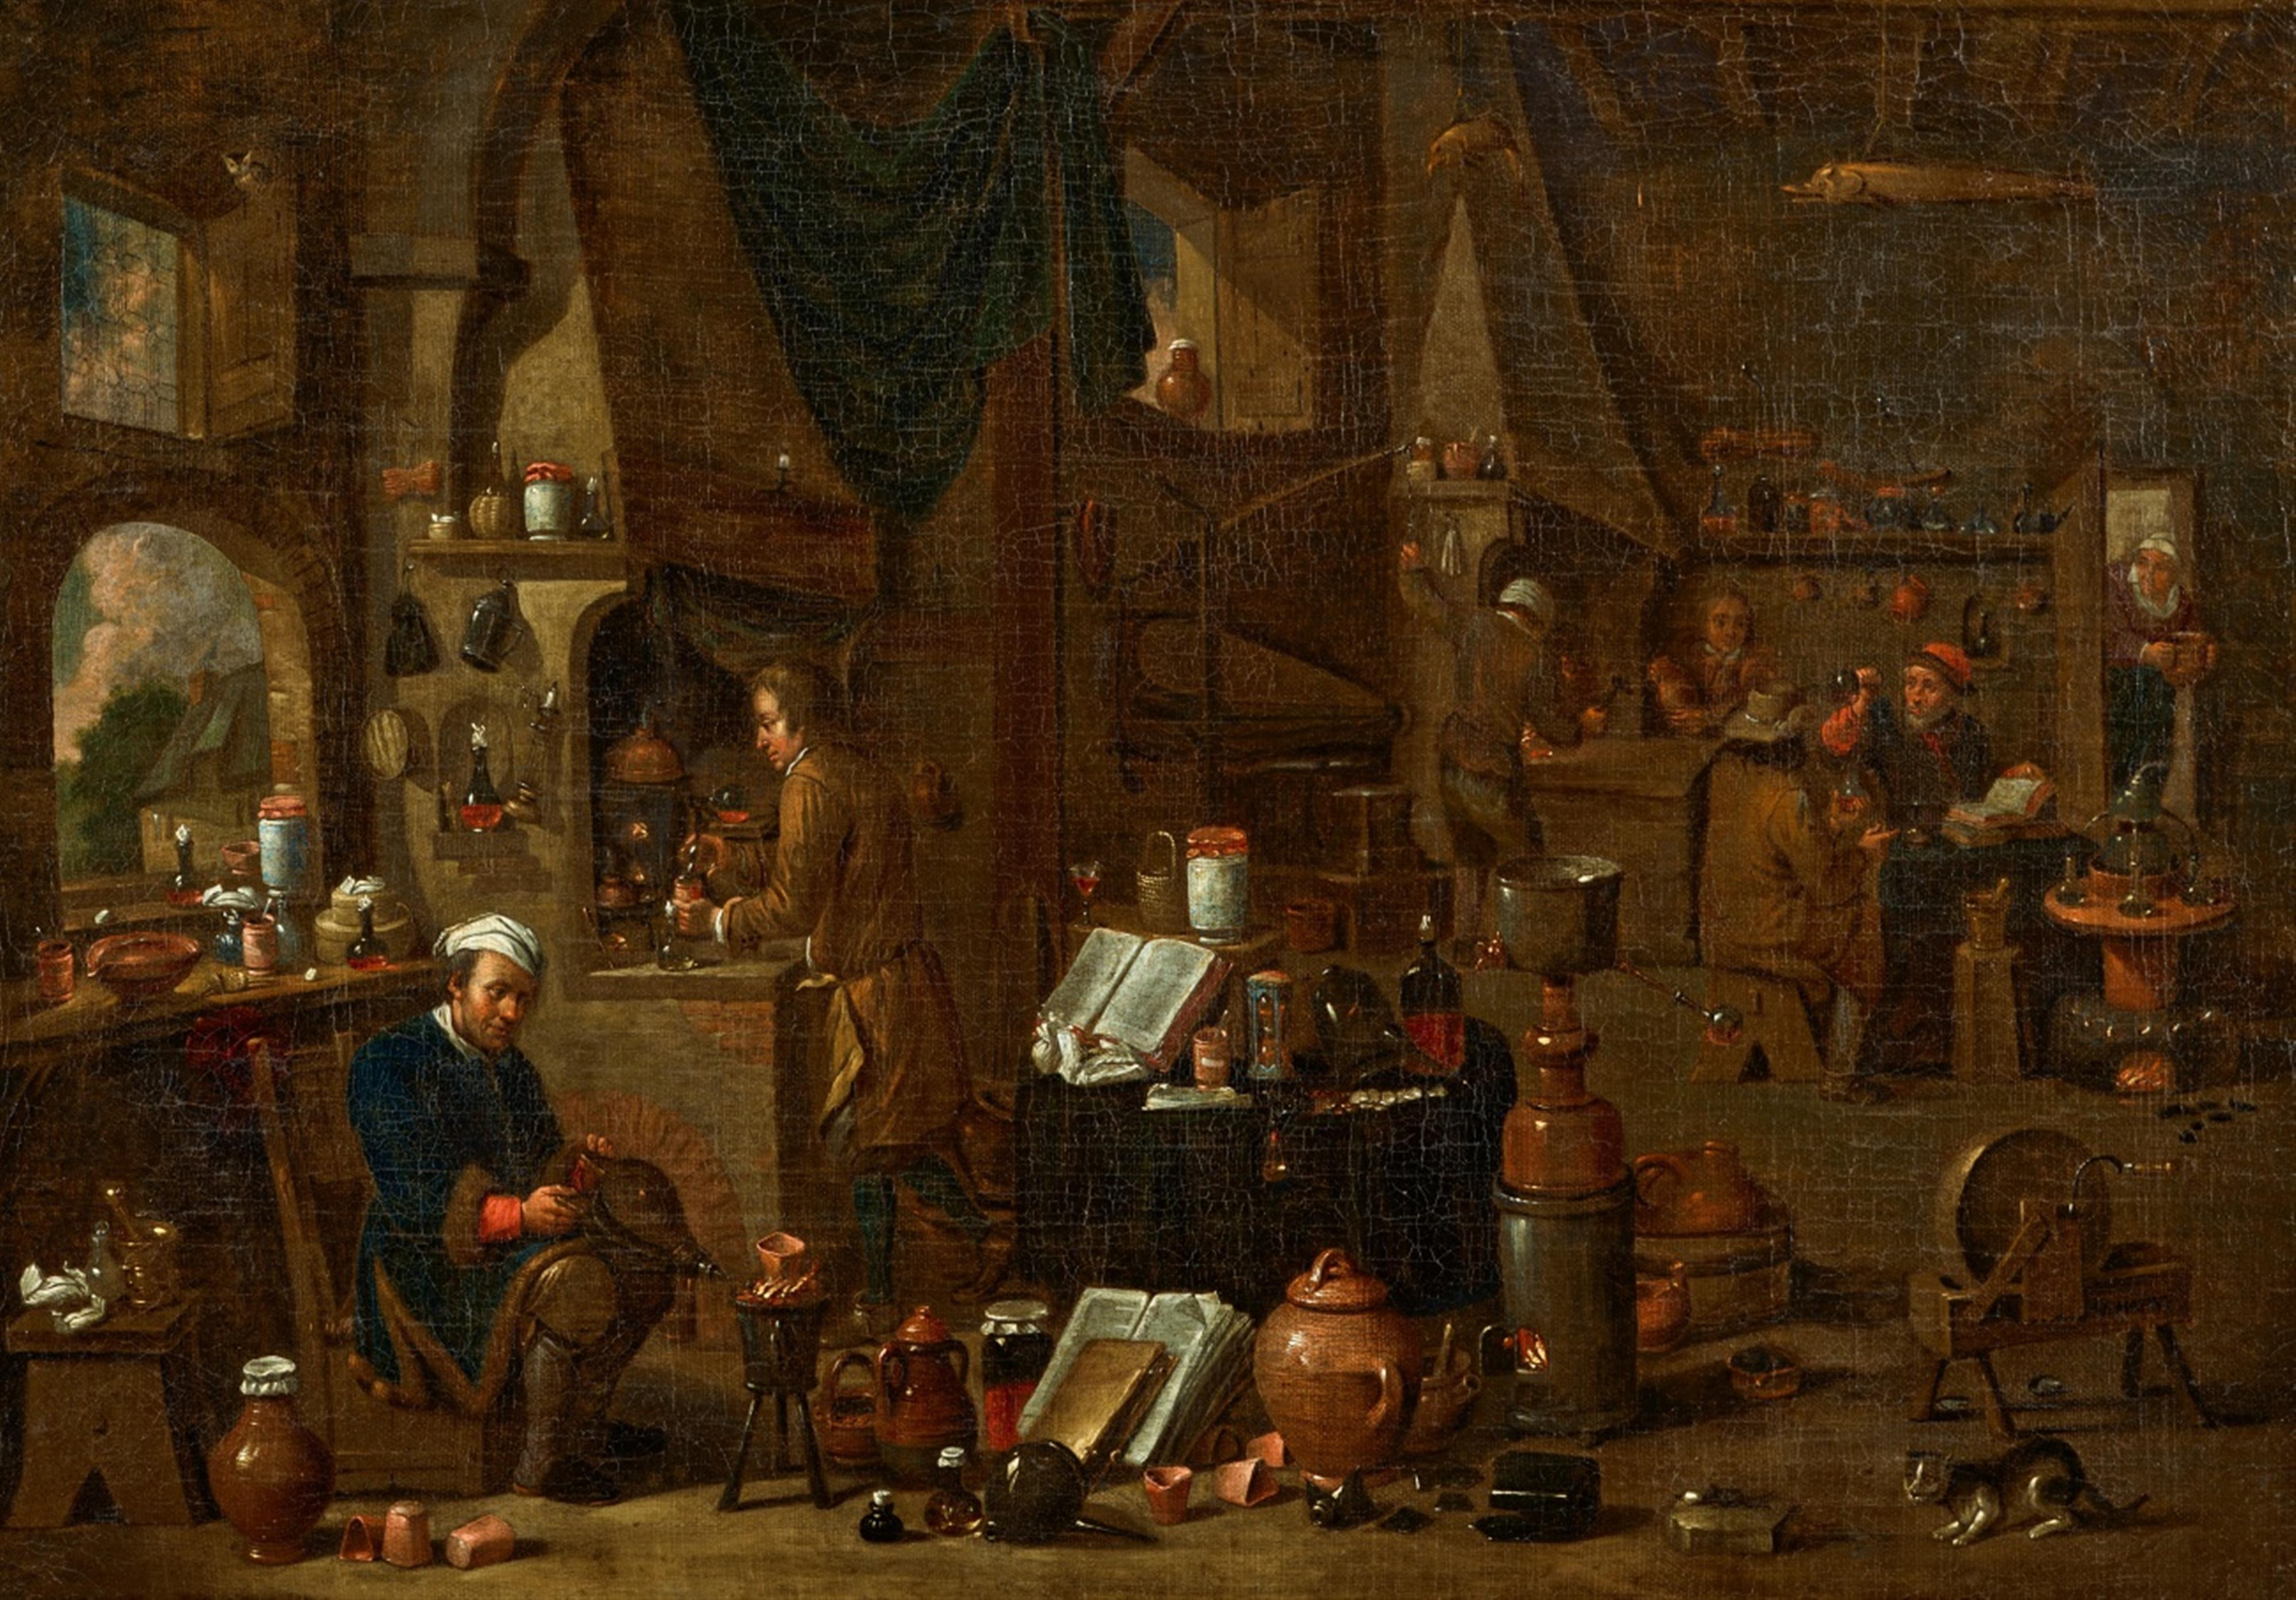 Victor Mahu - Interior Scene with an Alchemist and his Assistants - image-1